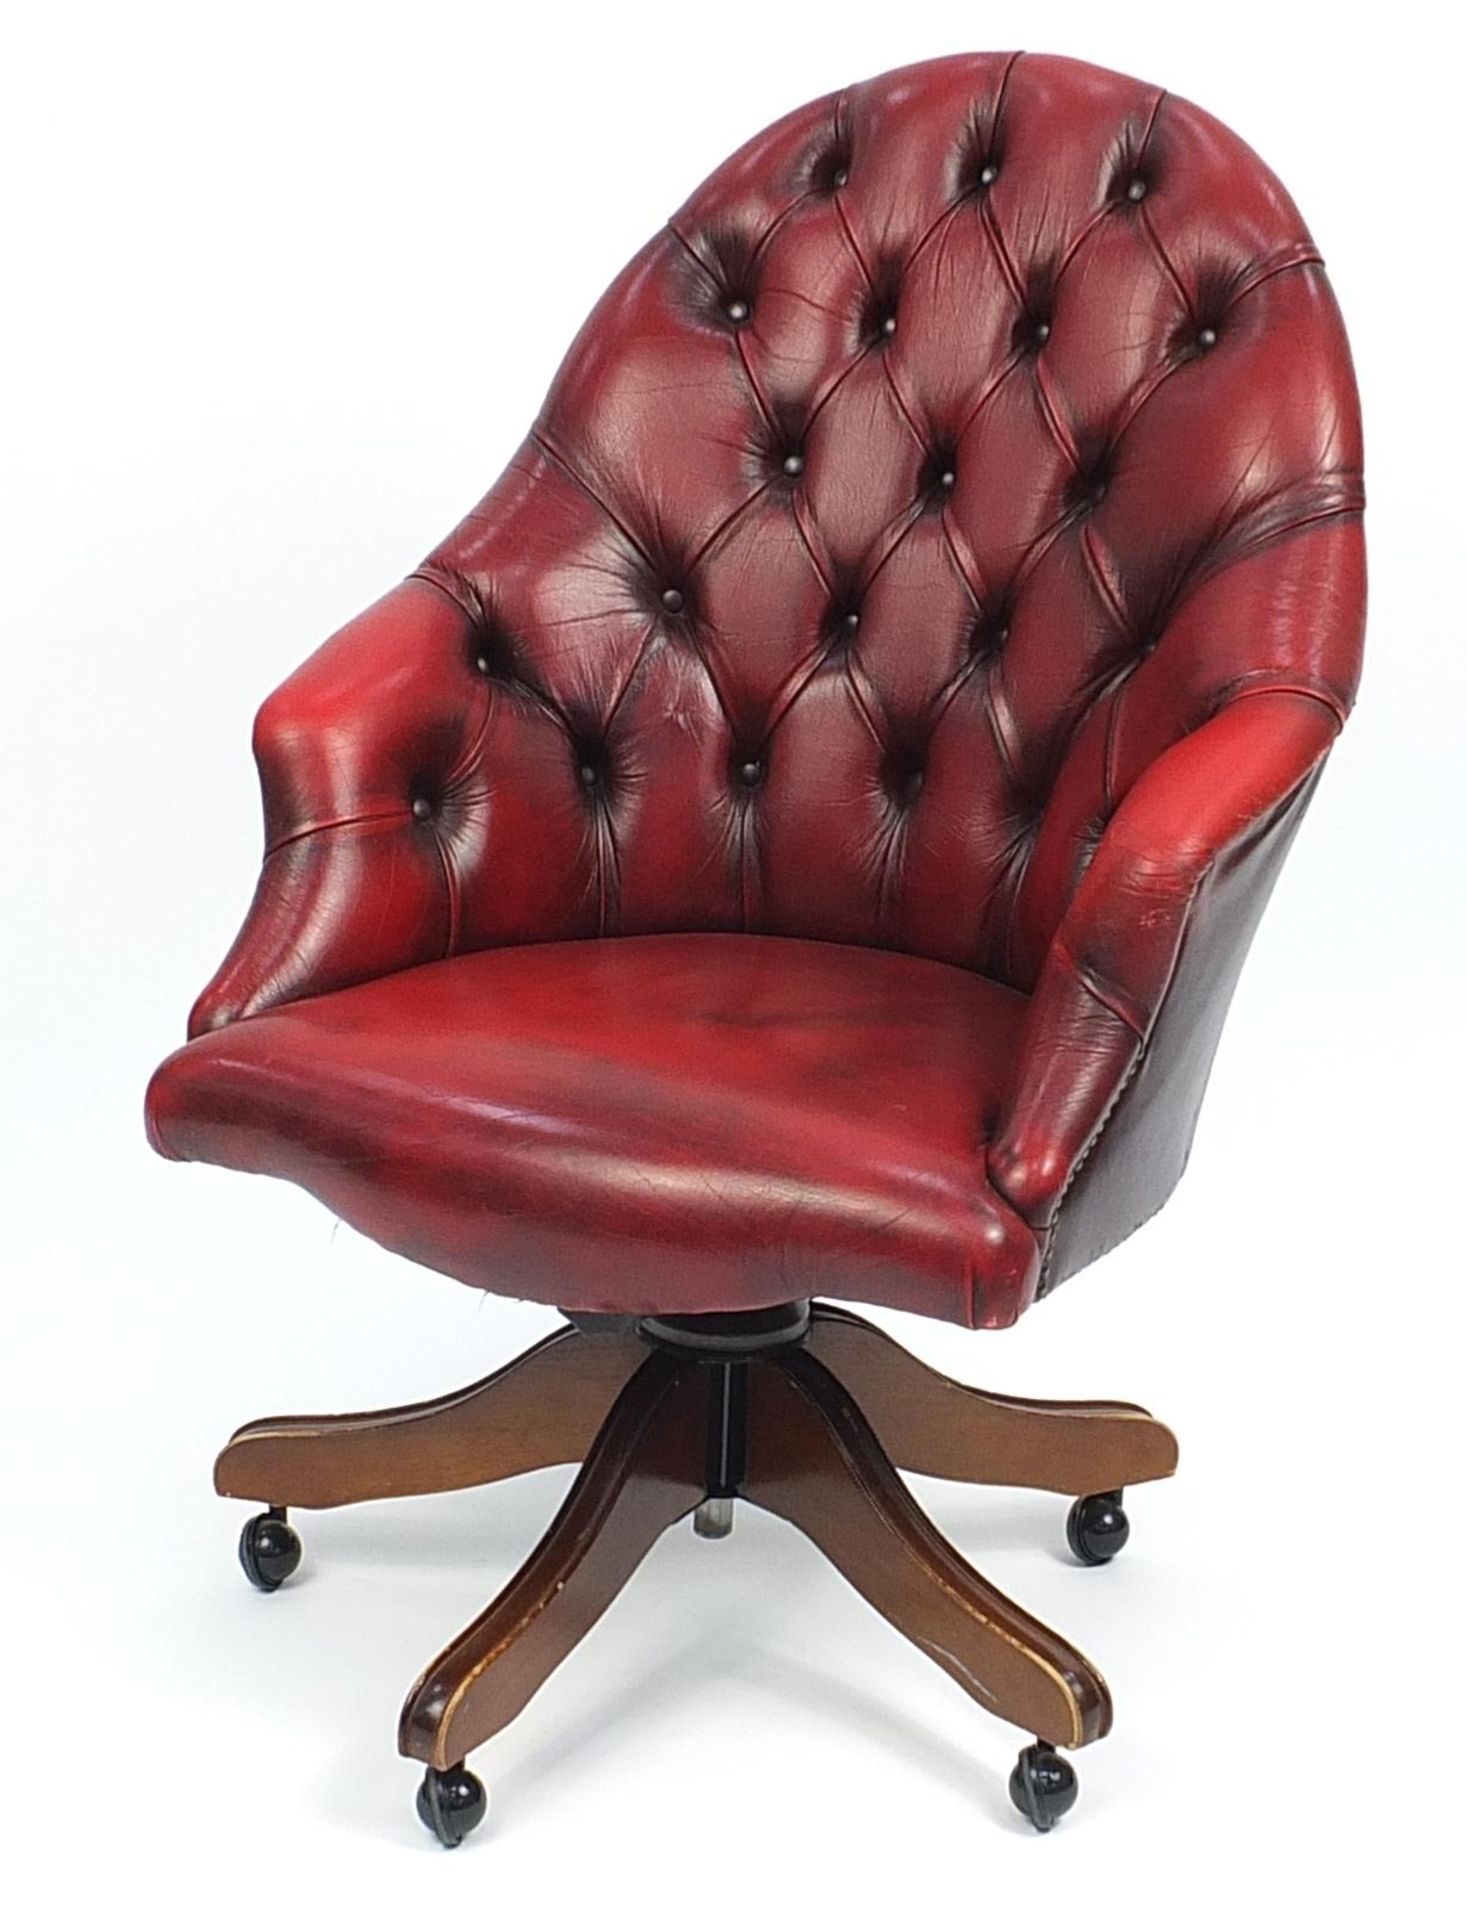 Mahogany framed high back captain's chair with oxblood leather button upholstery, 100cm high